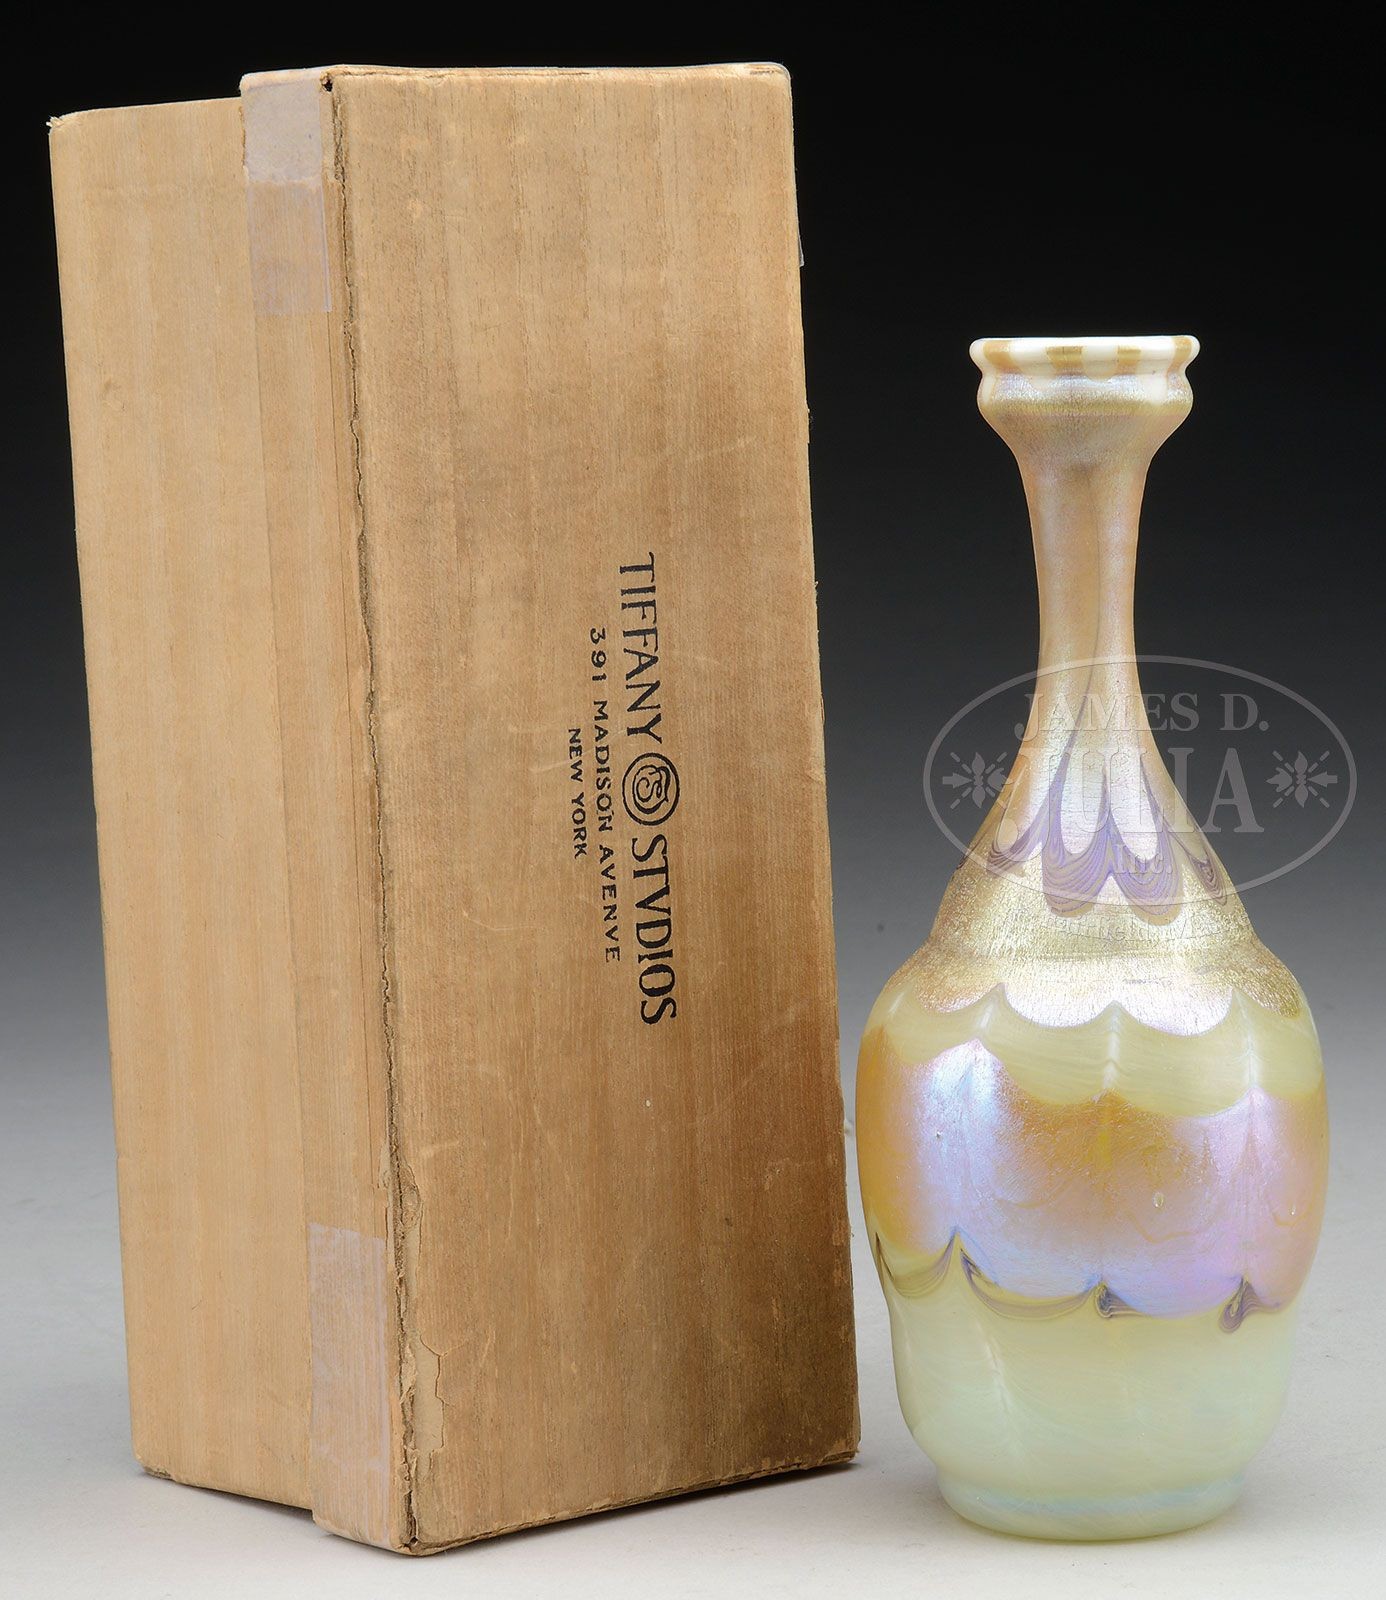 colored glass cylinder vases of tiffany favrile glass decorated vase tiffany favrile vase has for tiffany favrile glass decorated vase tiffany favrile vase has opaque cream colored glass body shading